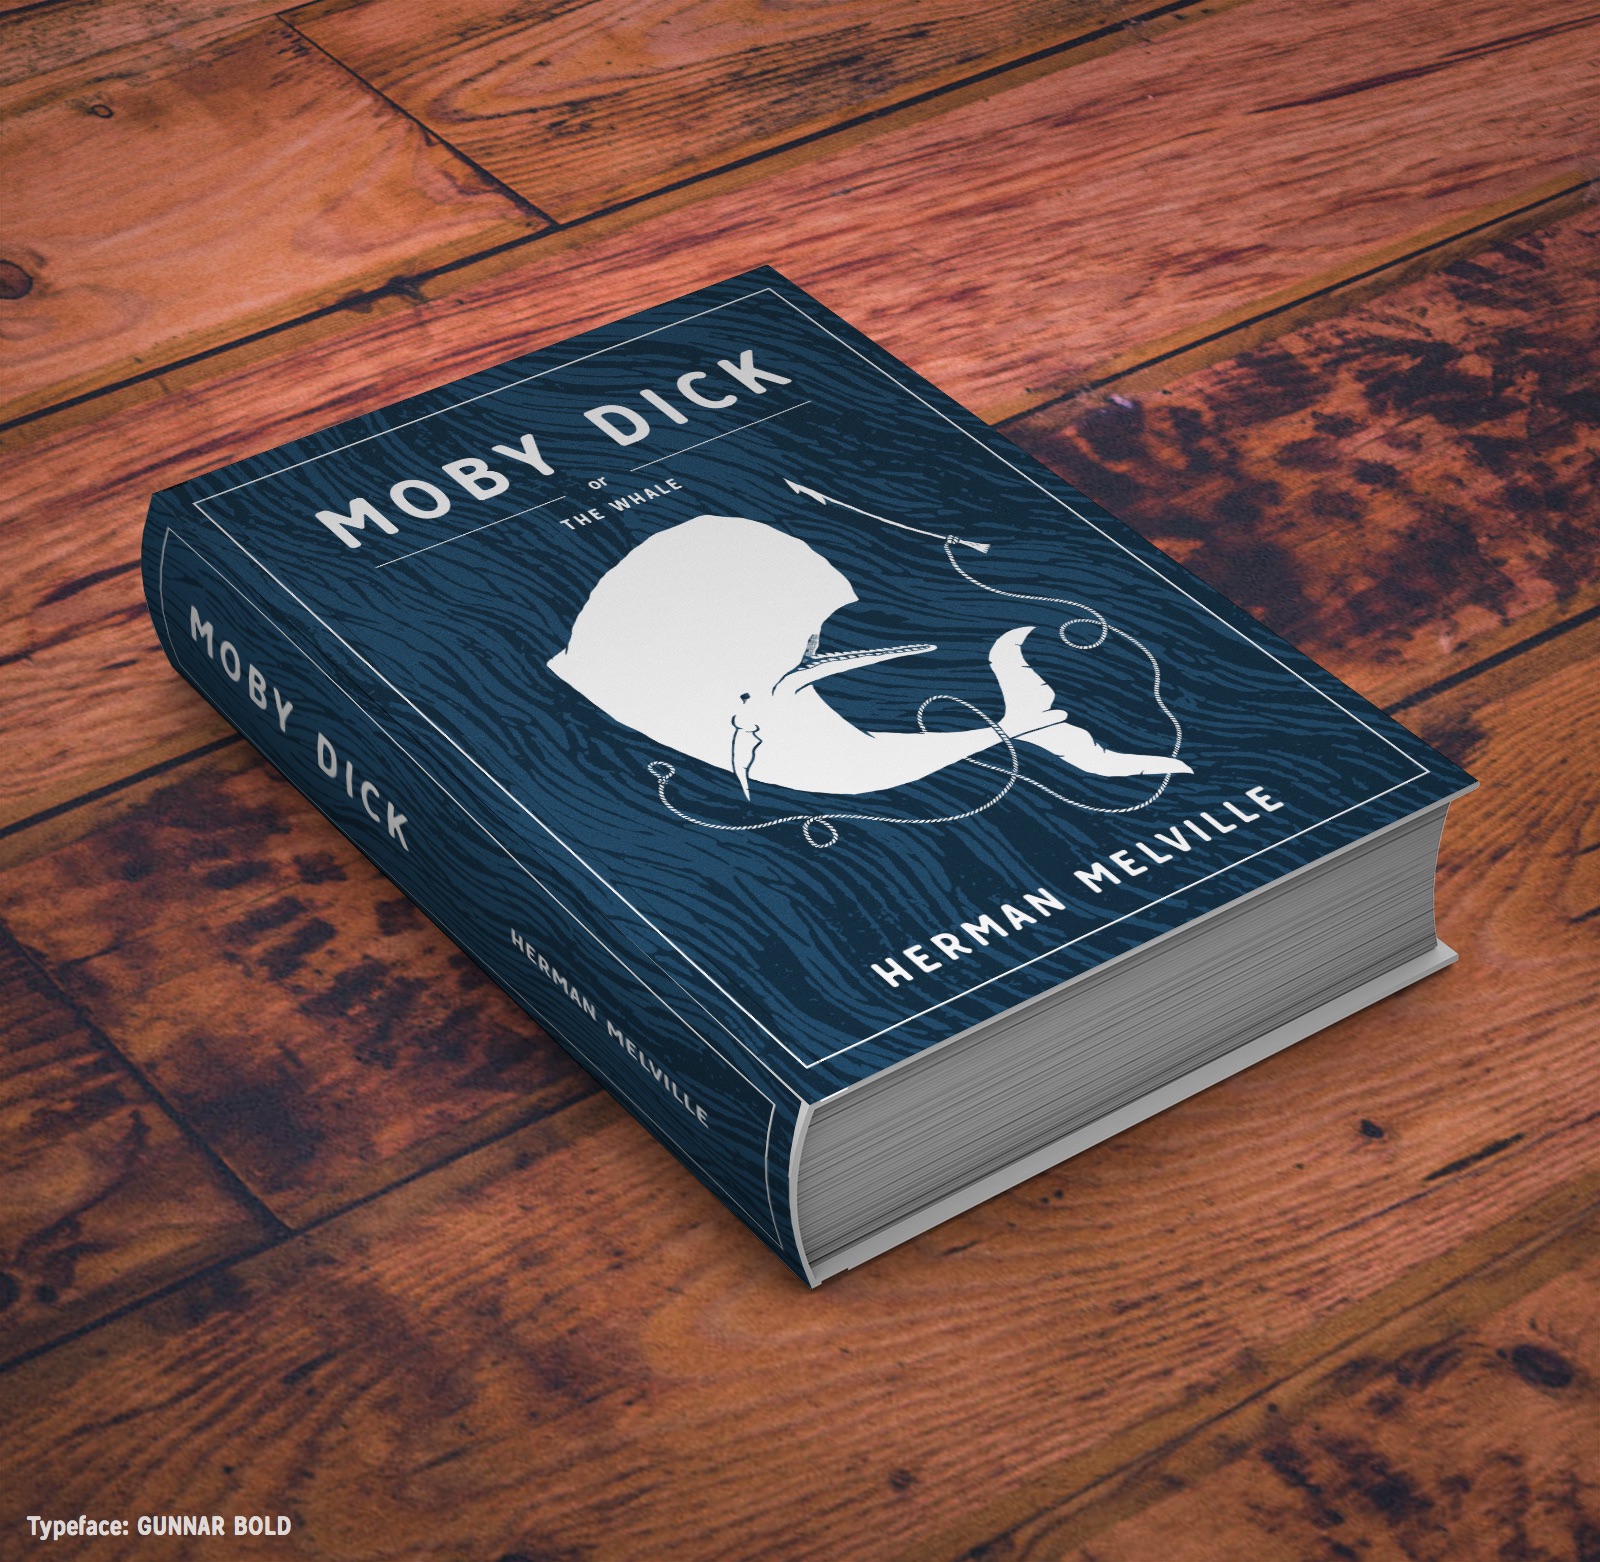 Gunnar Bold - Moby Dick example